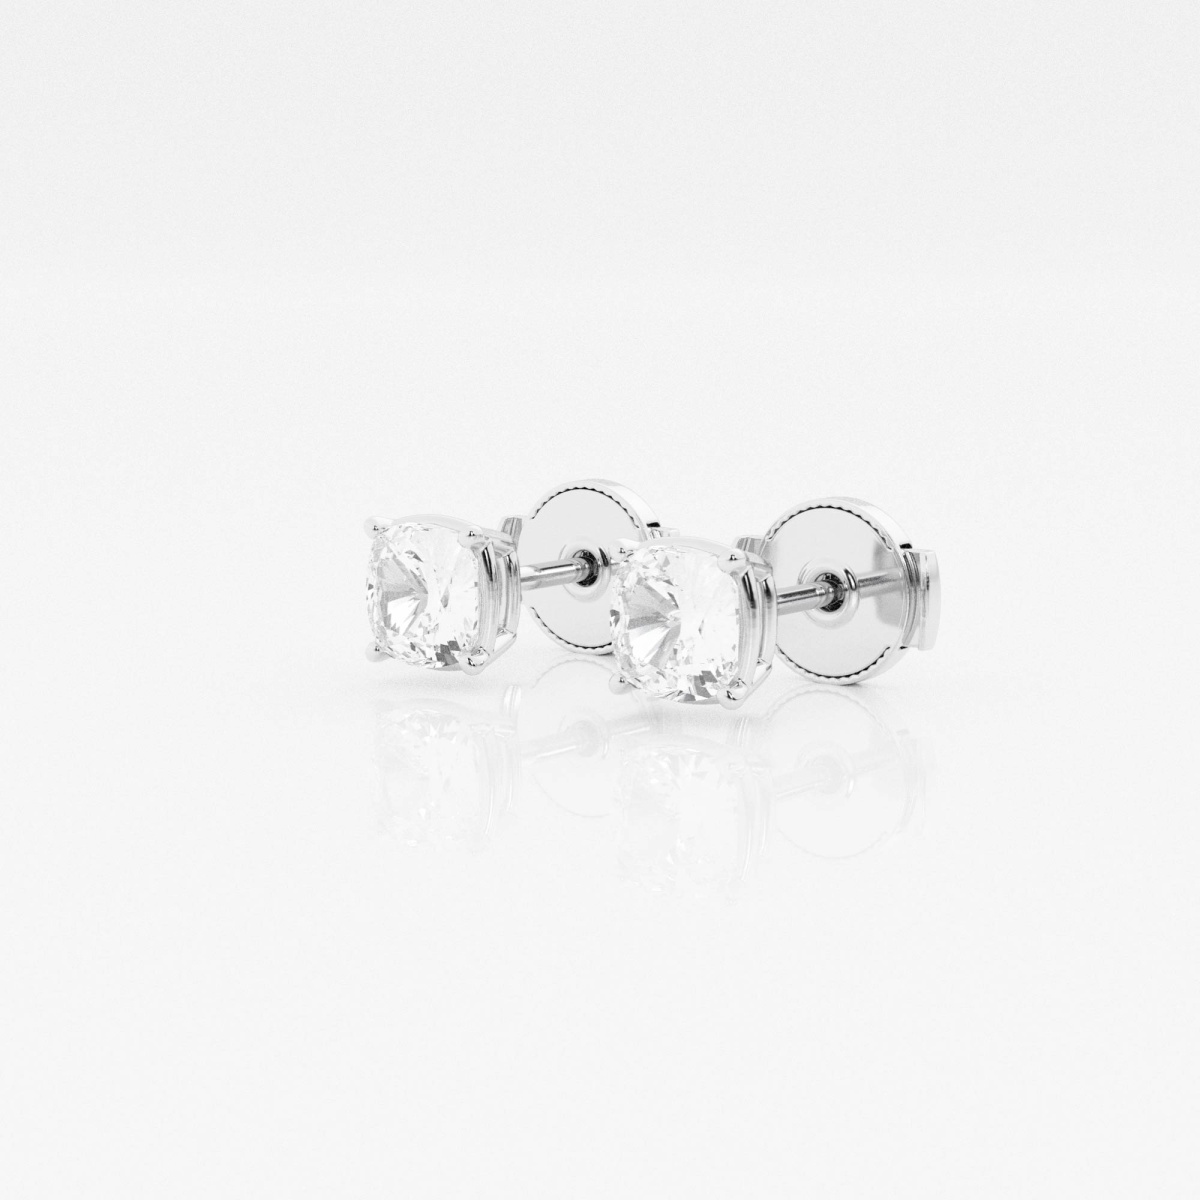 Additional Image 1 for  1 ctw Cushion Lab Grown Diamond Solitaire Stud Earrings